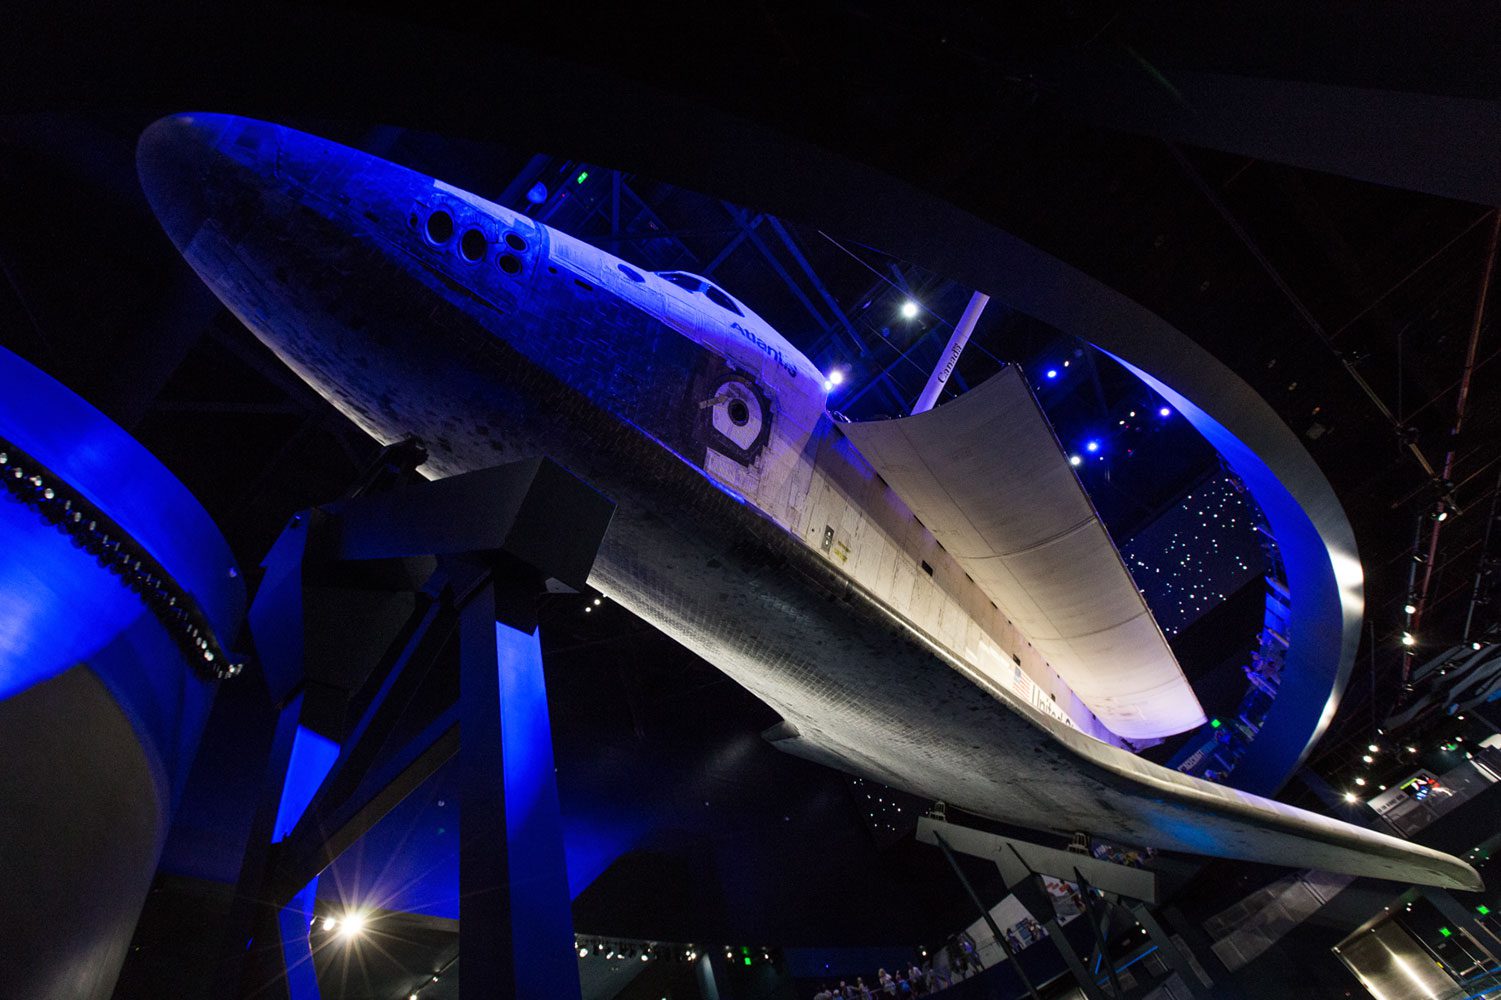 Space shuttle hanging in Atlantis attraction